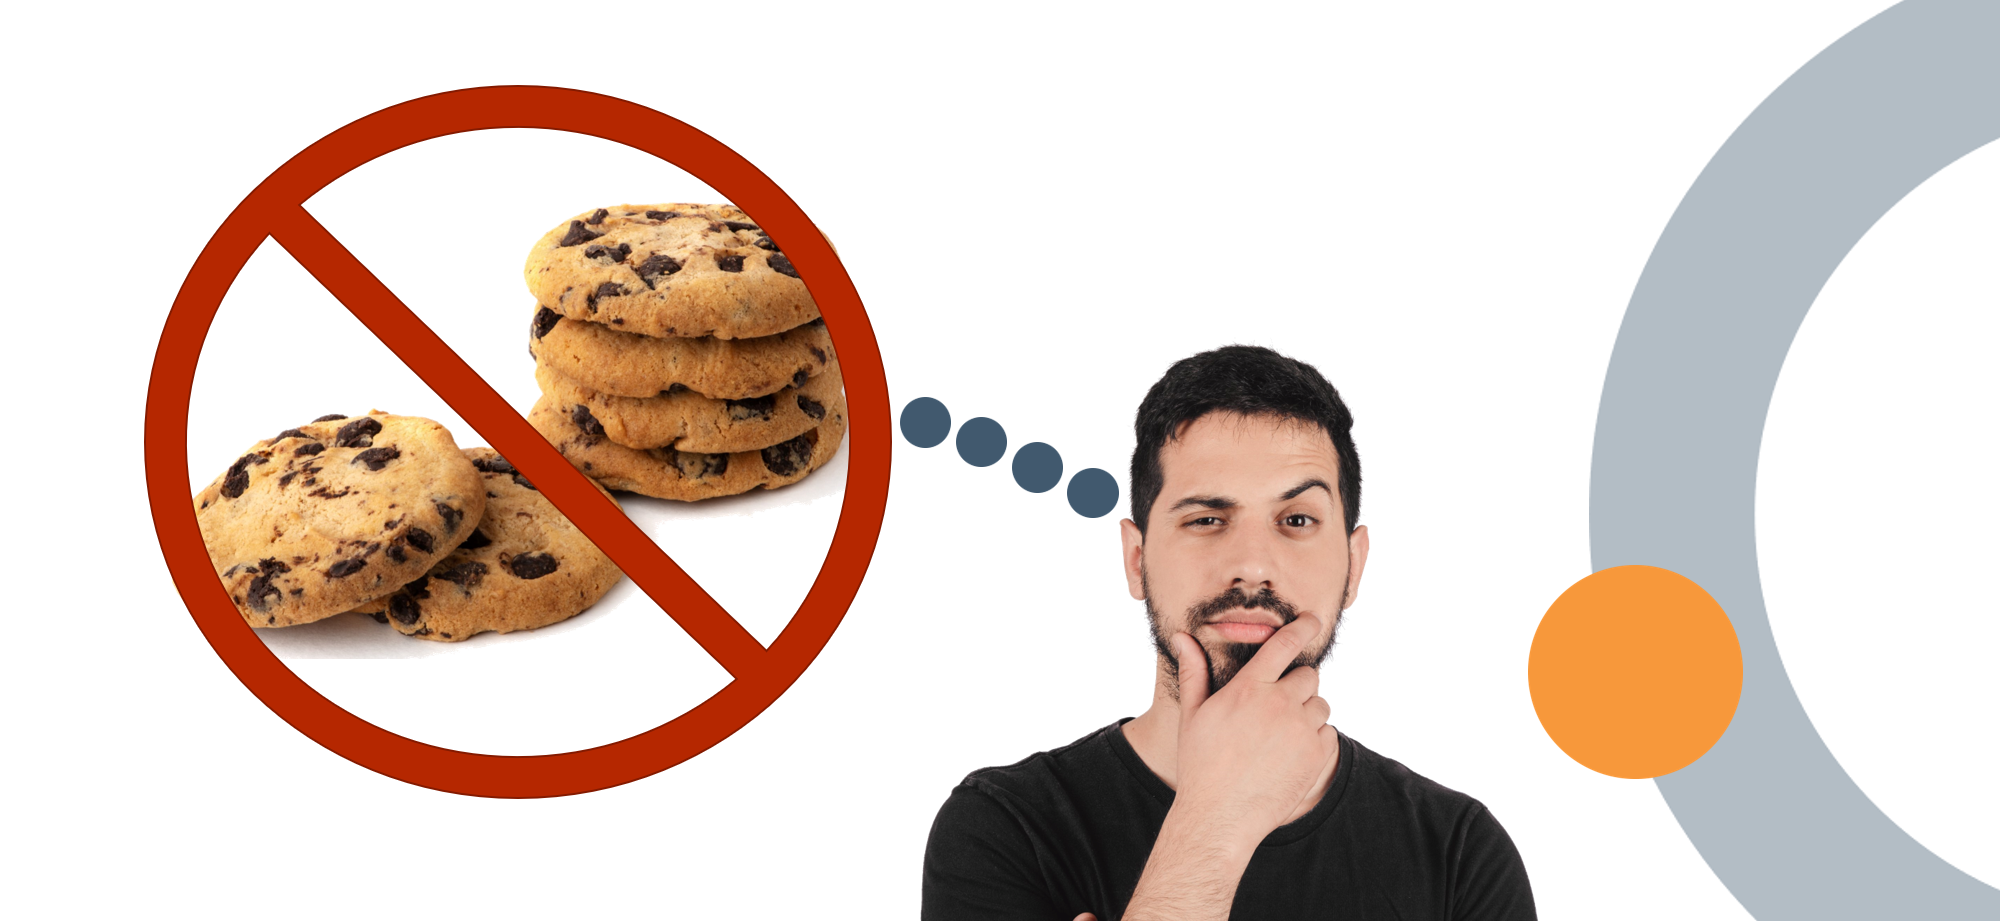 Cookie-less Acquisition Strategies or Bust